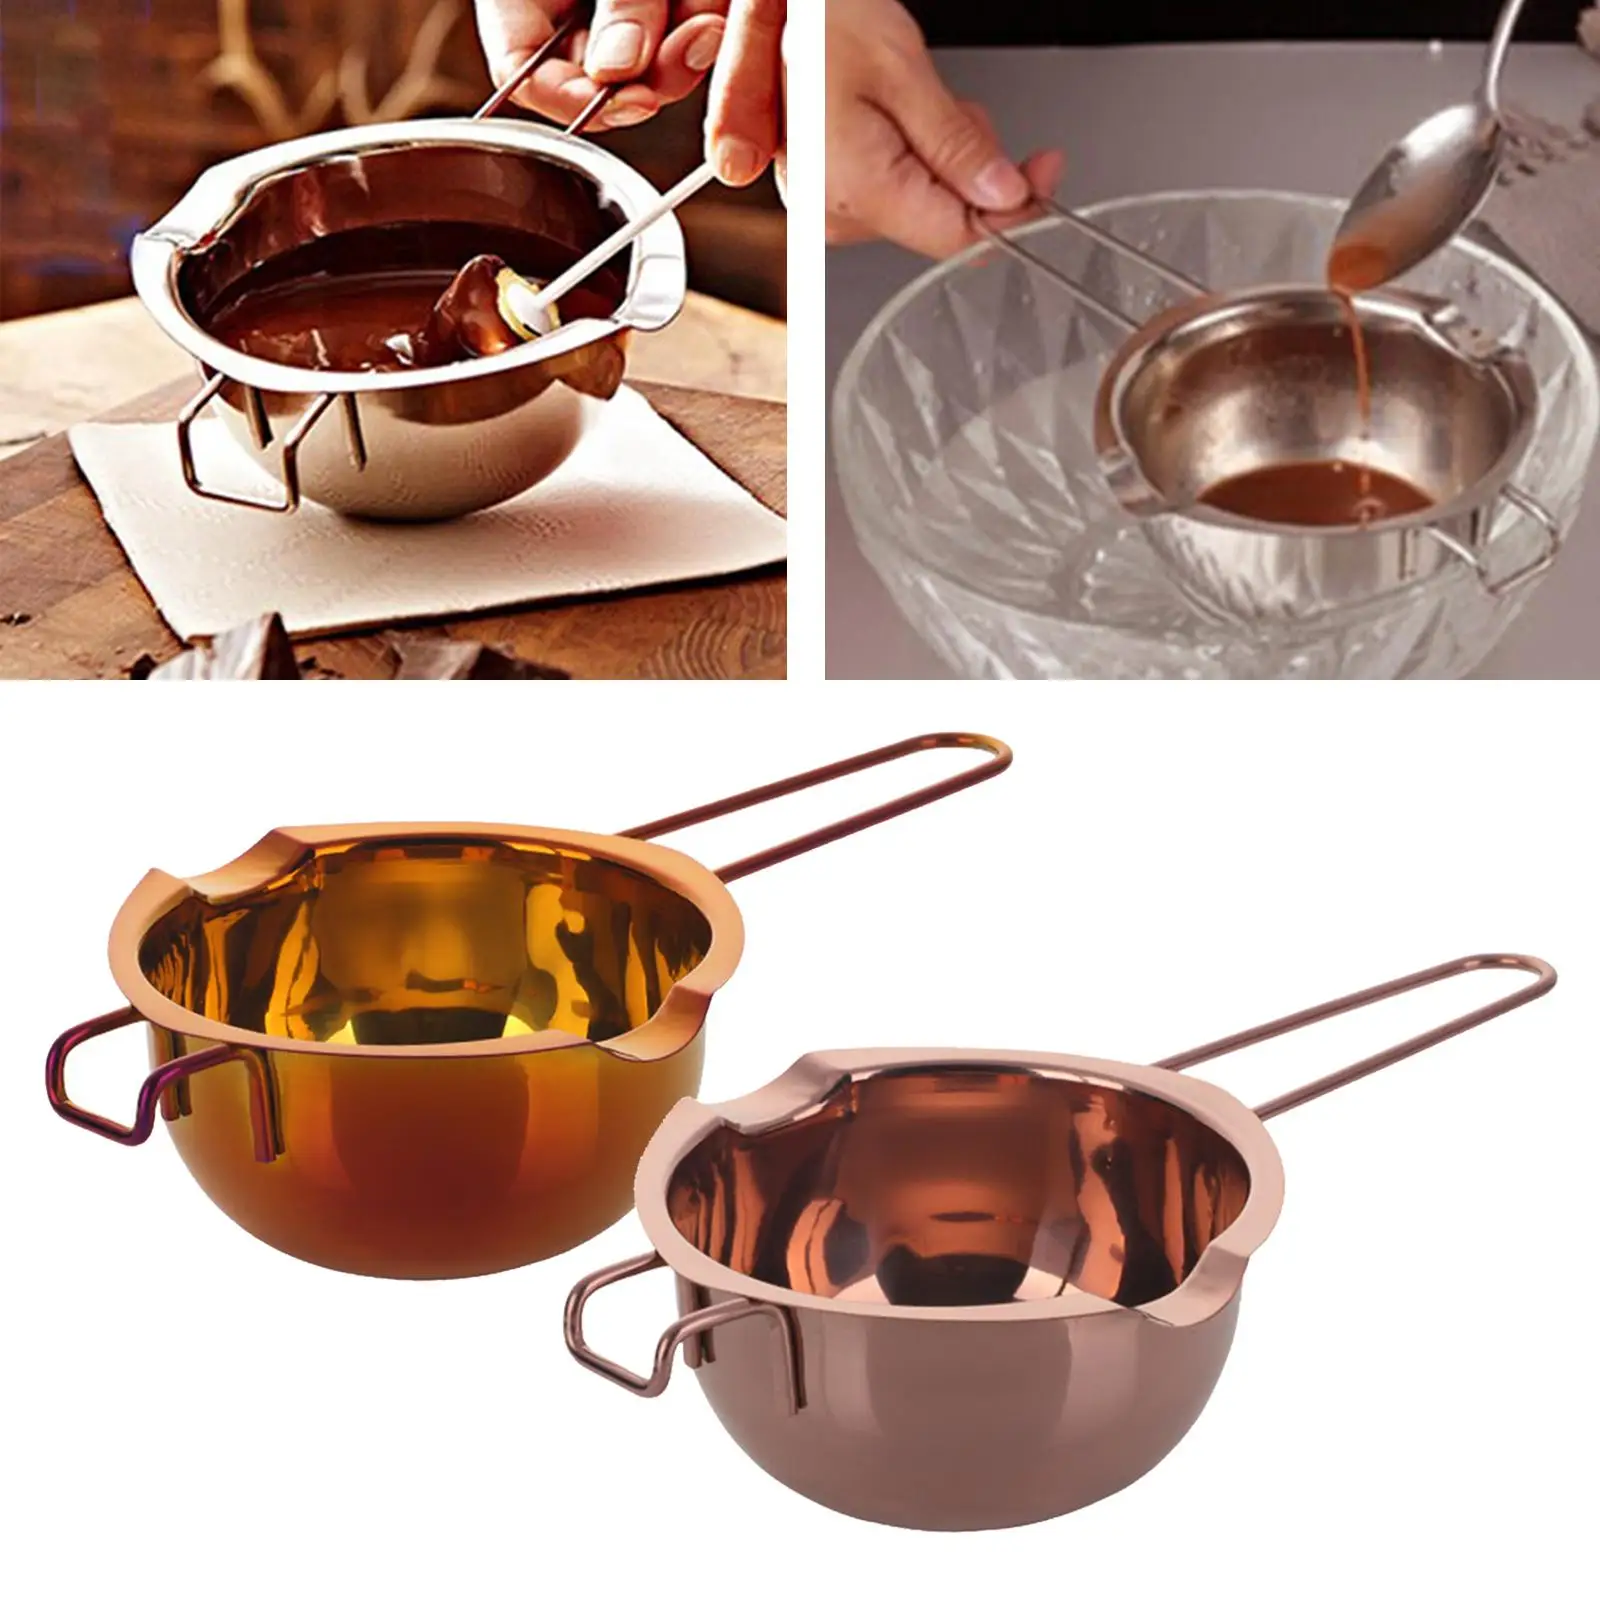 400ml Double Boiler Pot Melting Pot for Melting Chocolate, Candy, Candle ,Flat Bottom ,Long Handle-Protect Hands Durable Sturdy